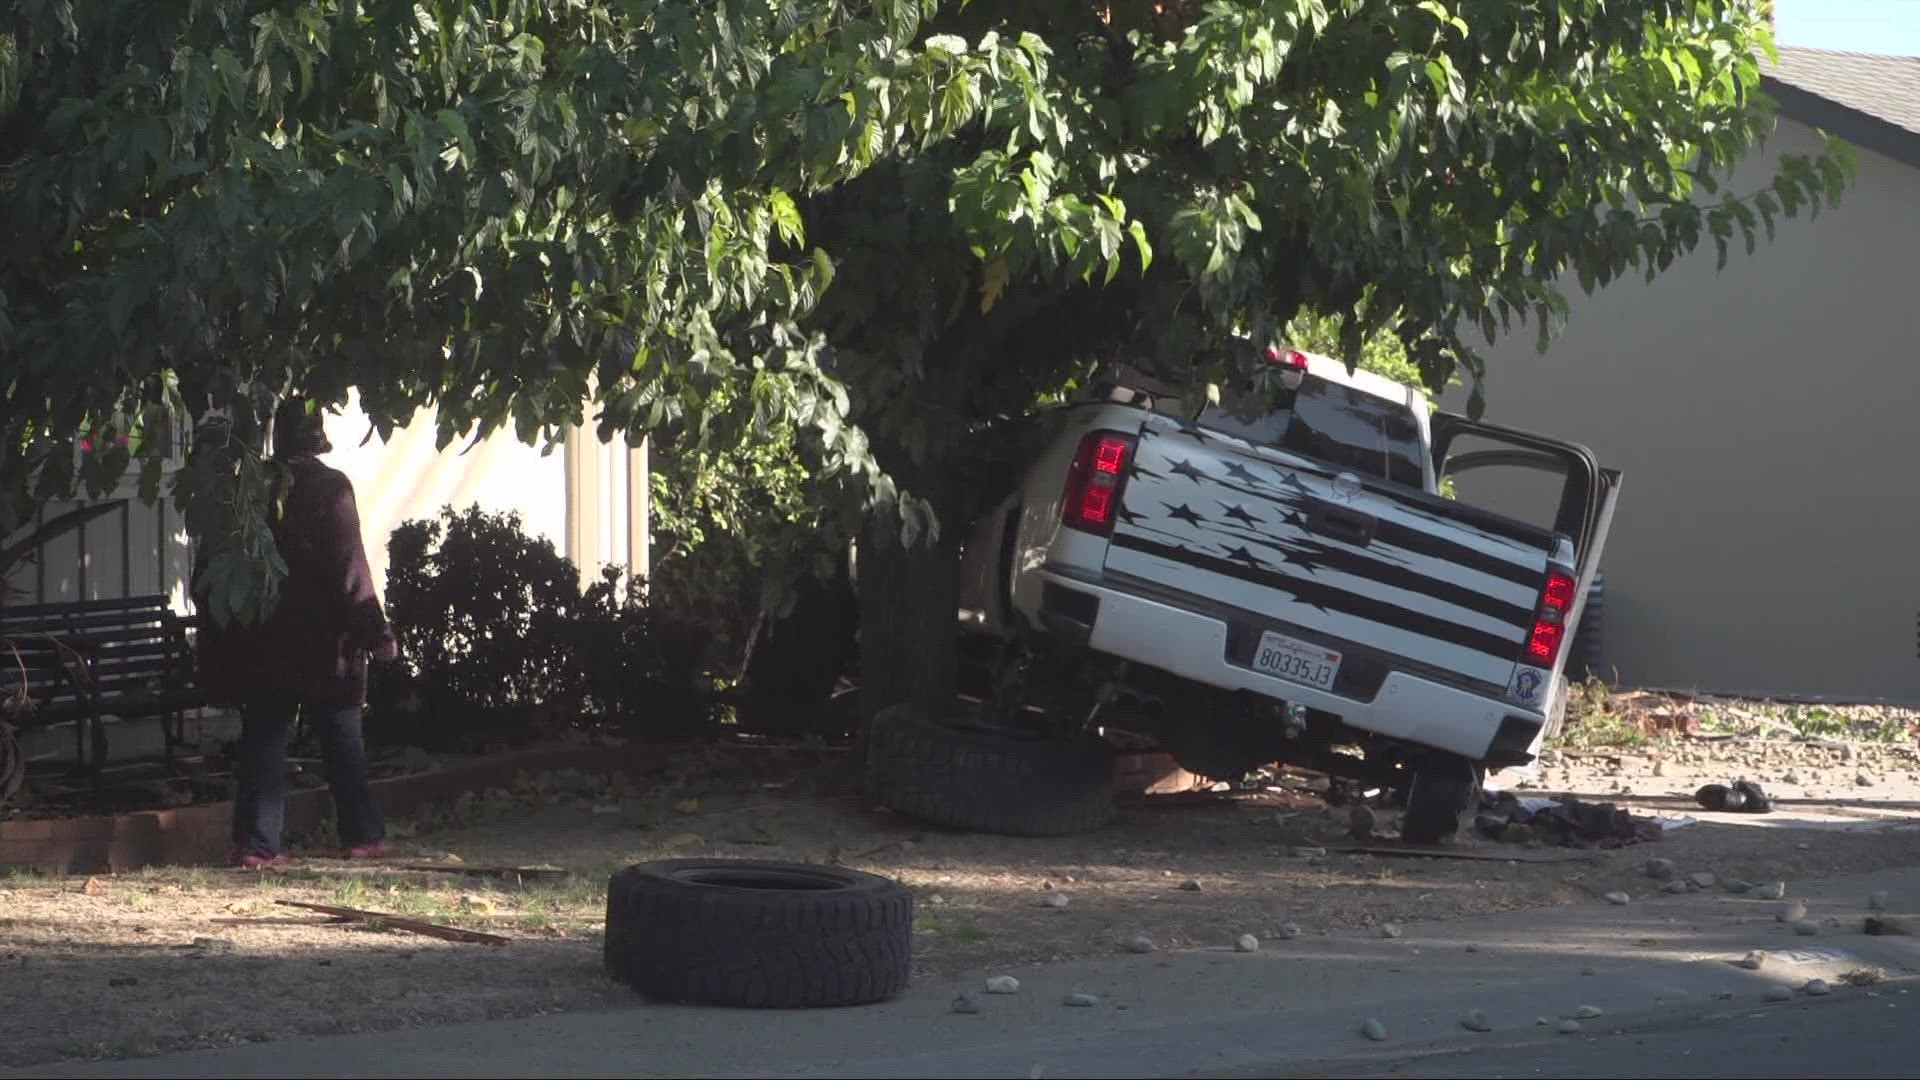 Officials began pursuing a vehicle traveling Northbound Highway 99 near Calvine Road, getting up to a 115mph chase before crashing into two Sacramento homes.